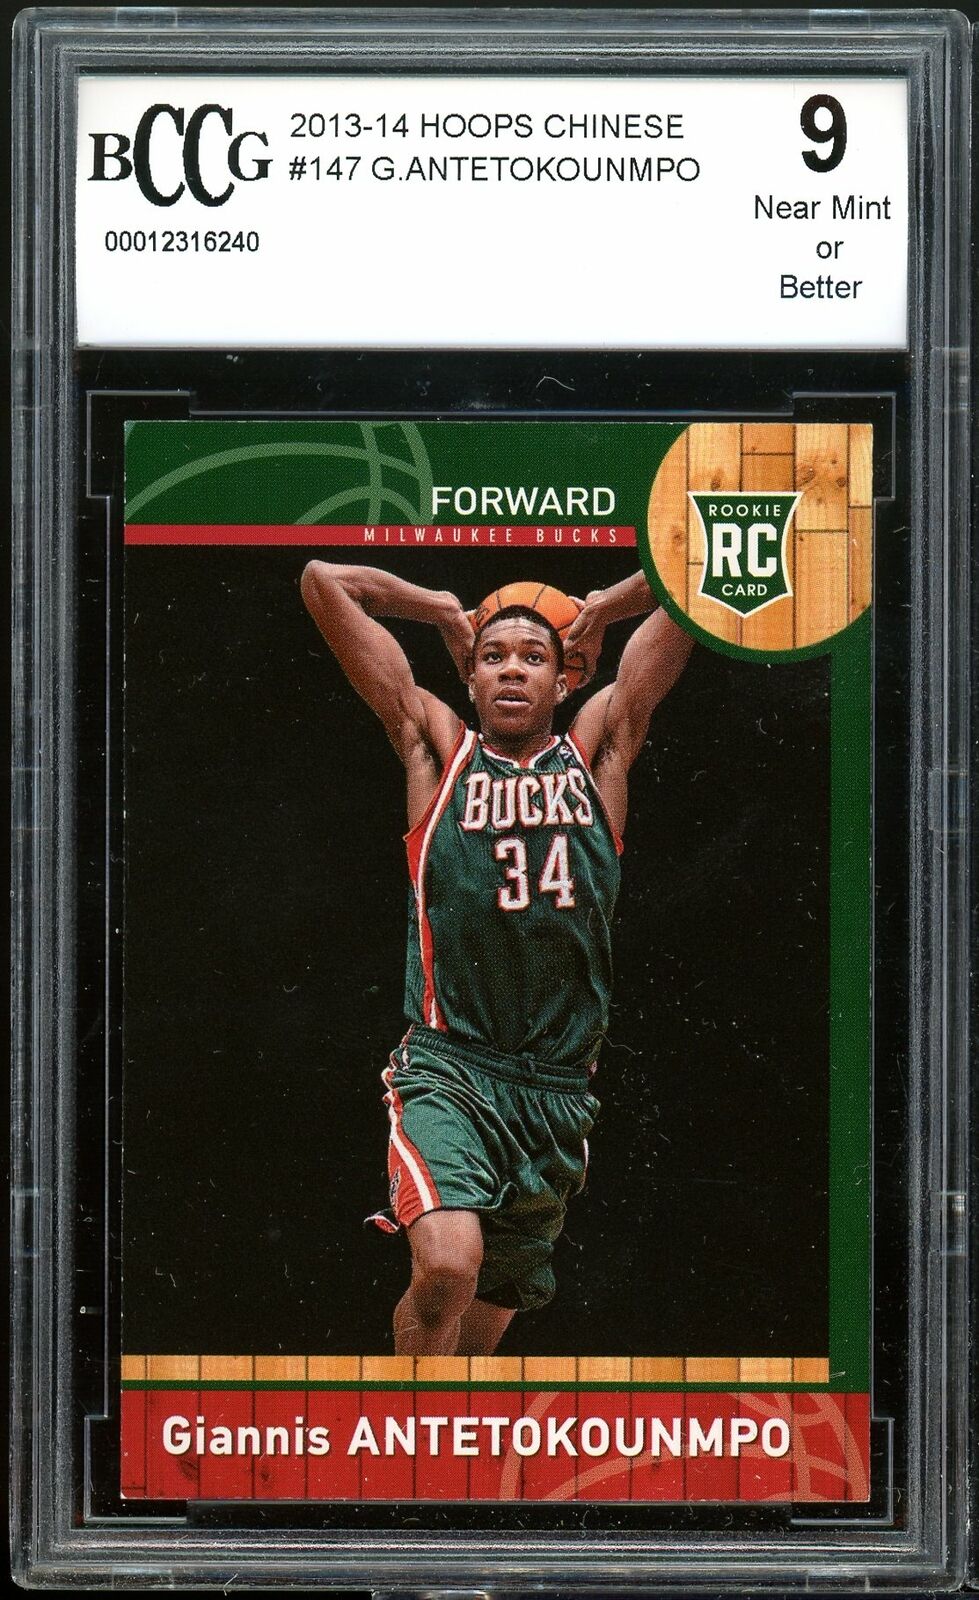 2013-14 Hoops Chinese #147 Giannis Antetokounmpo Rookie BGS BCCG 9 Near Mint+ Image 1